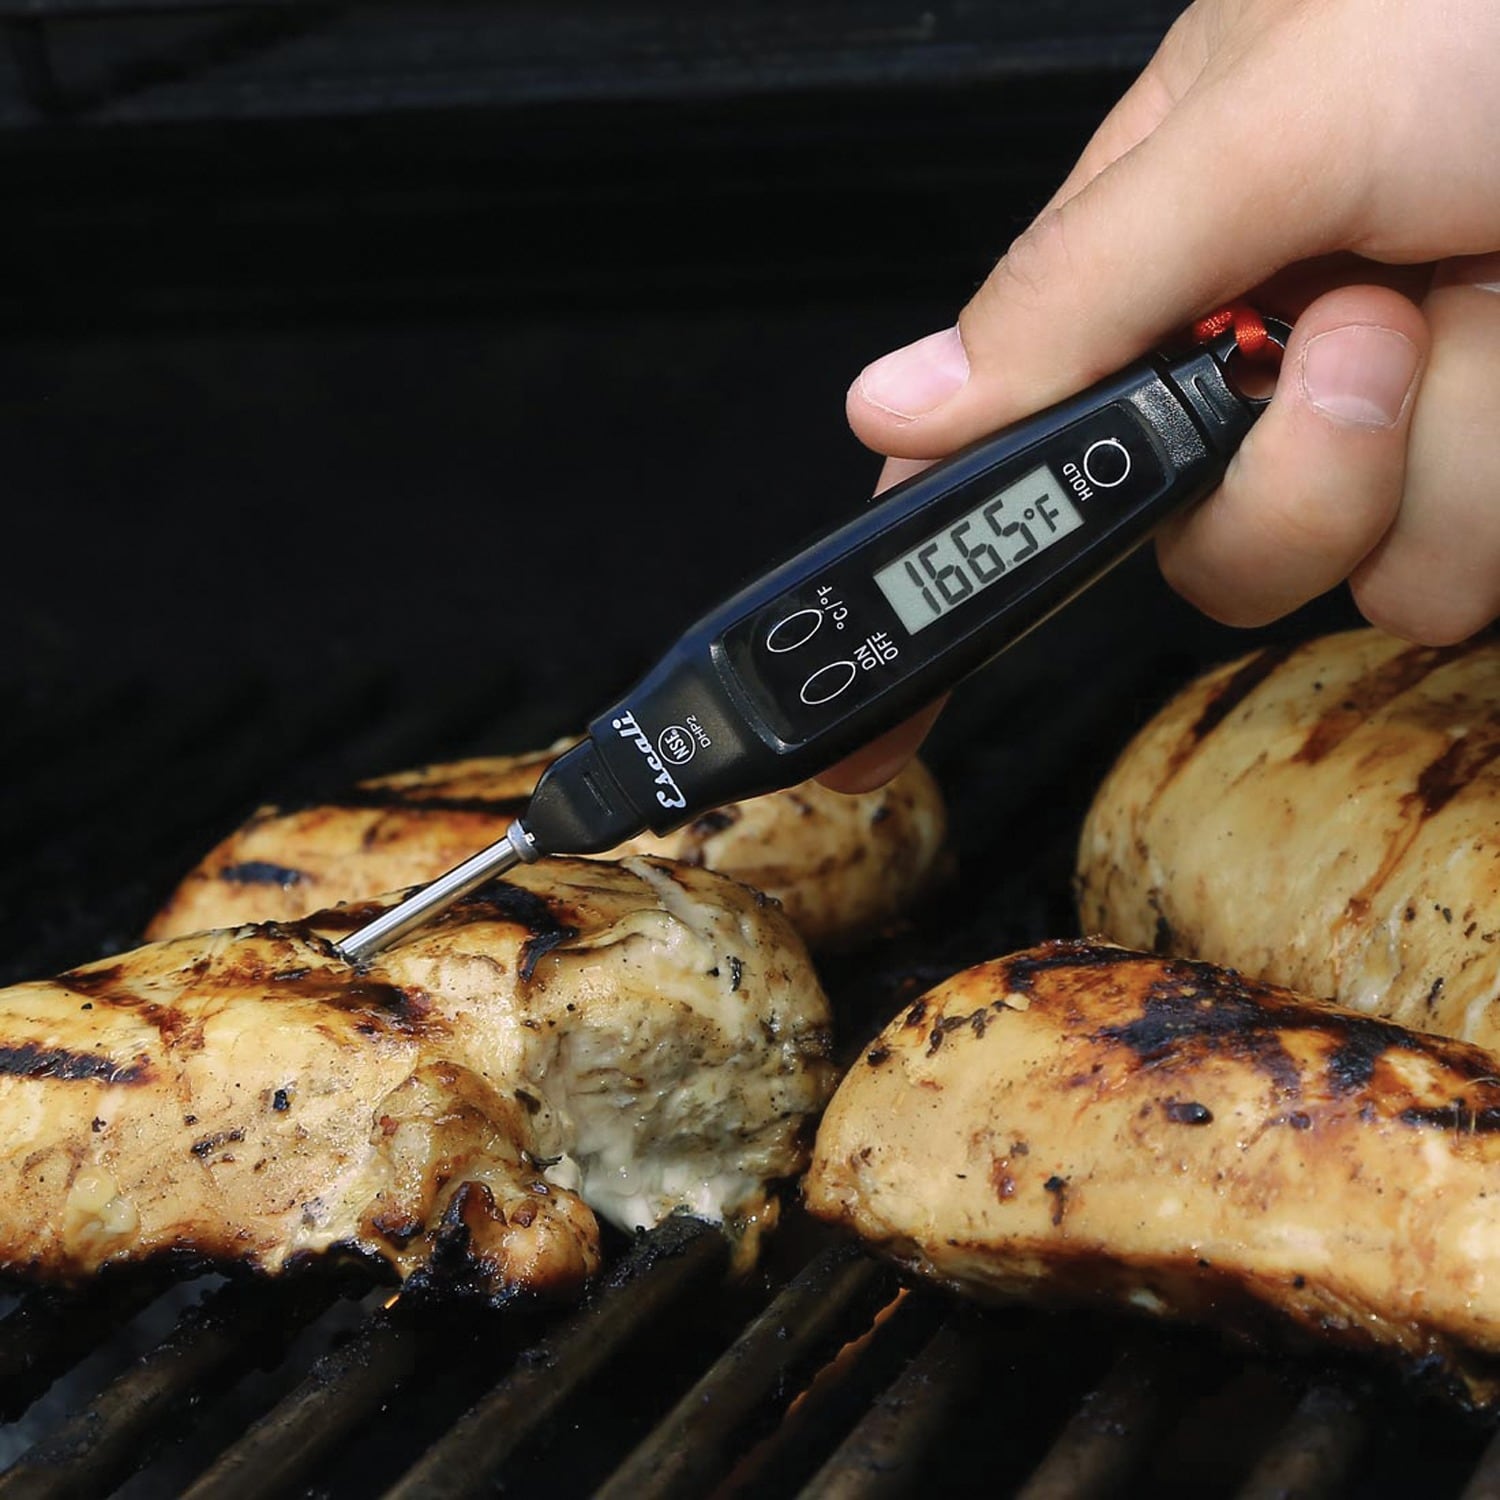 Escali Extra-Large Round Grill Thermometer - Clear Dial, Ideal Grill &  Searing Temperature Zones - For Direct Use on Cooking Surfaces in the Grill  Thermometers department at